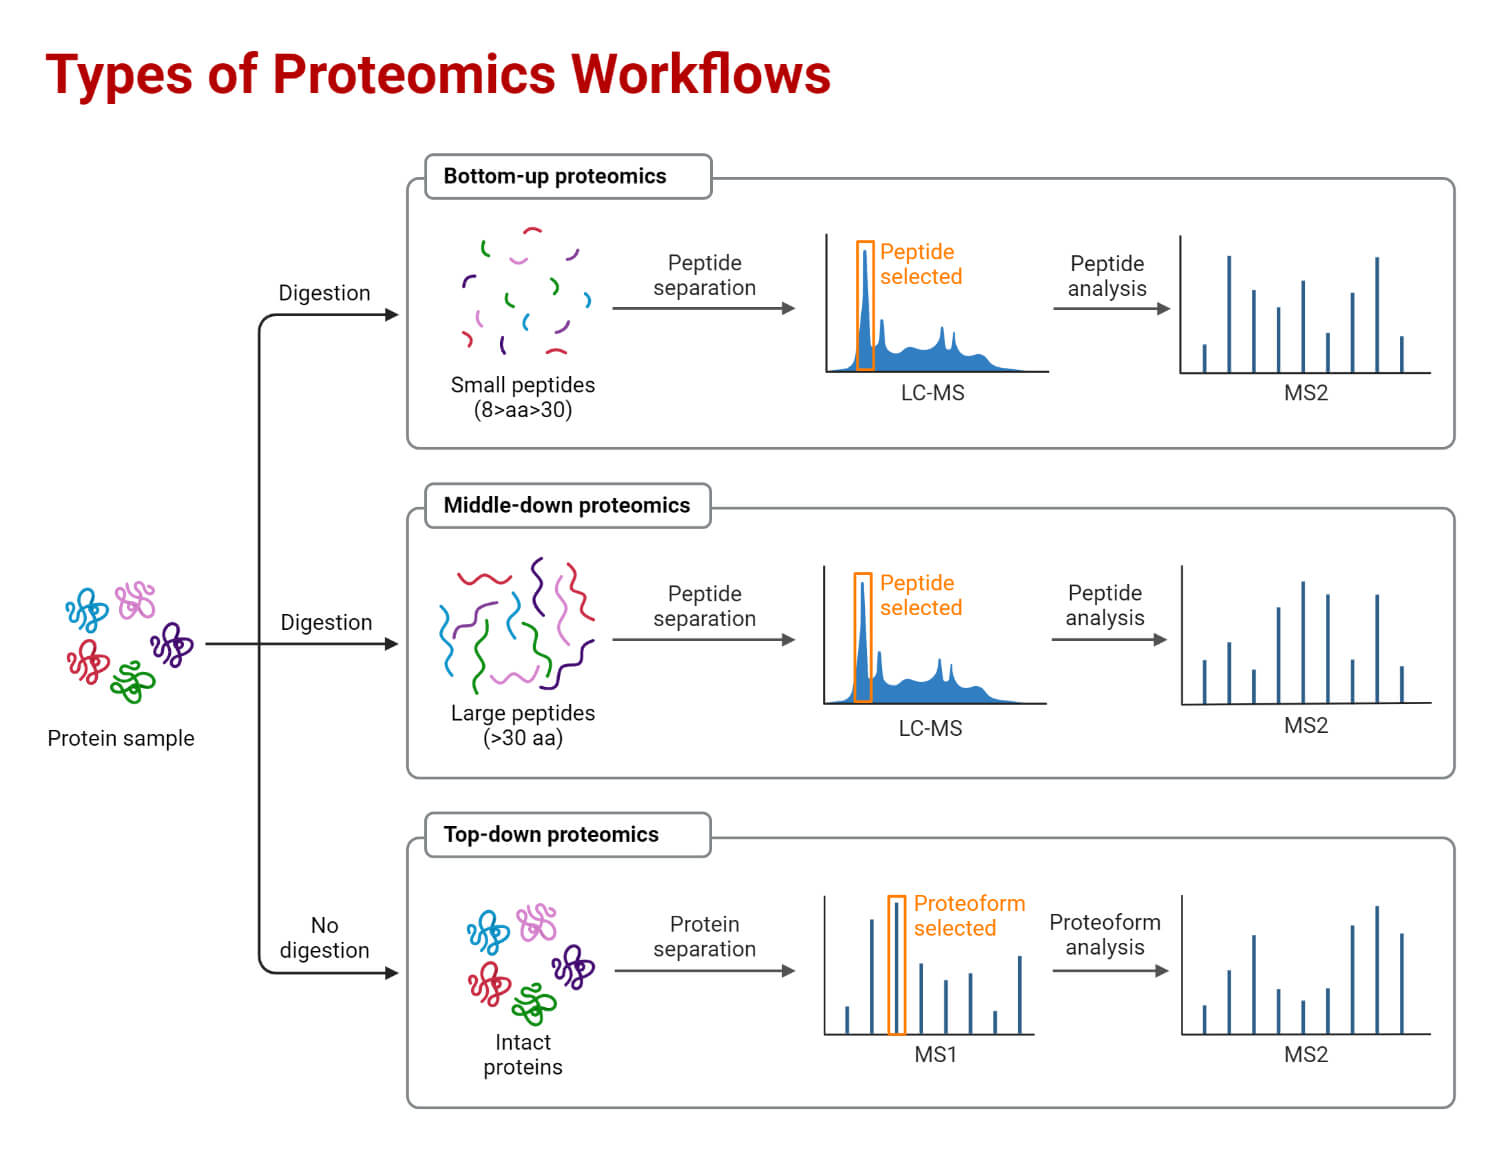 Types of Proteomics Workflows (Bottom-up, Middle-down and Top-down)